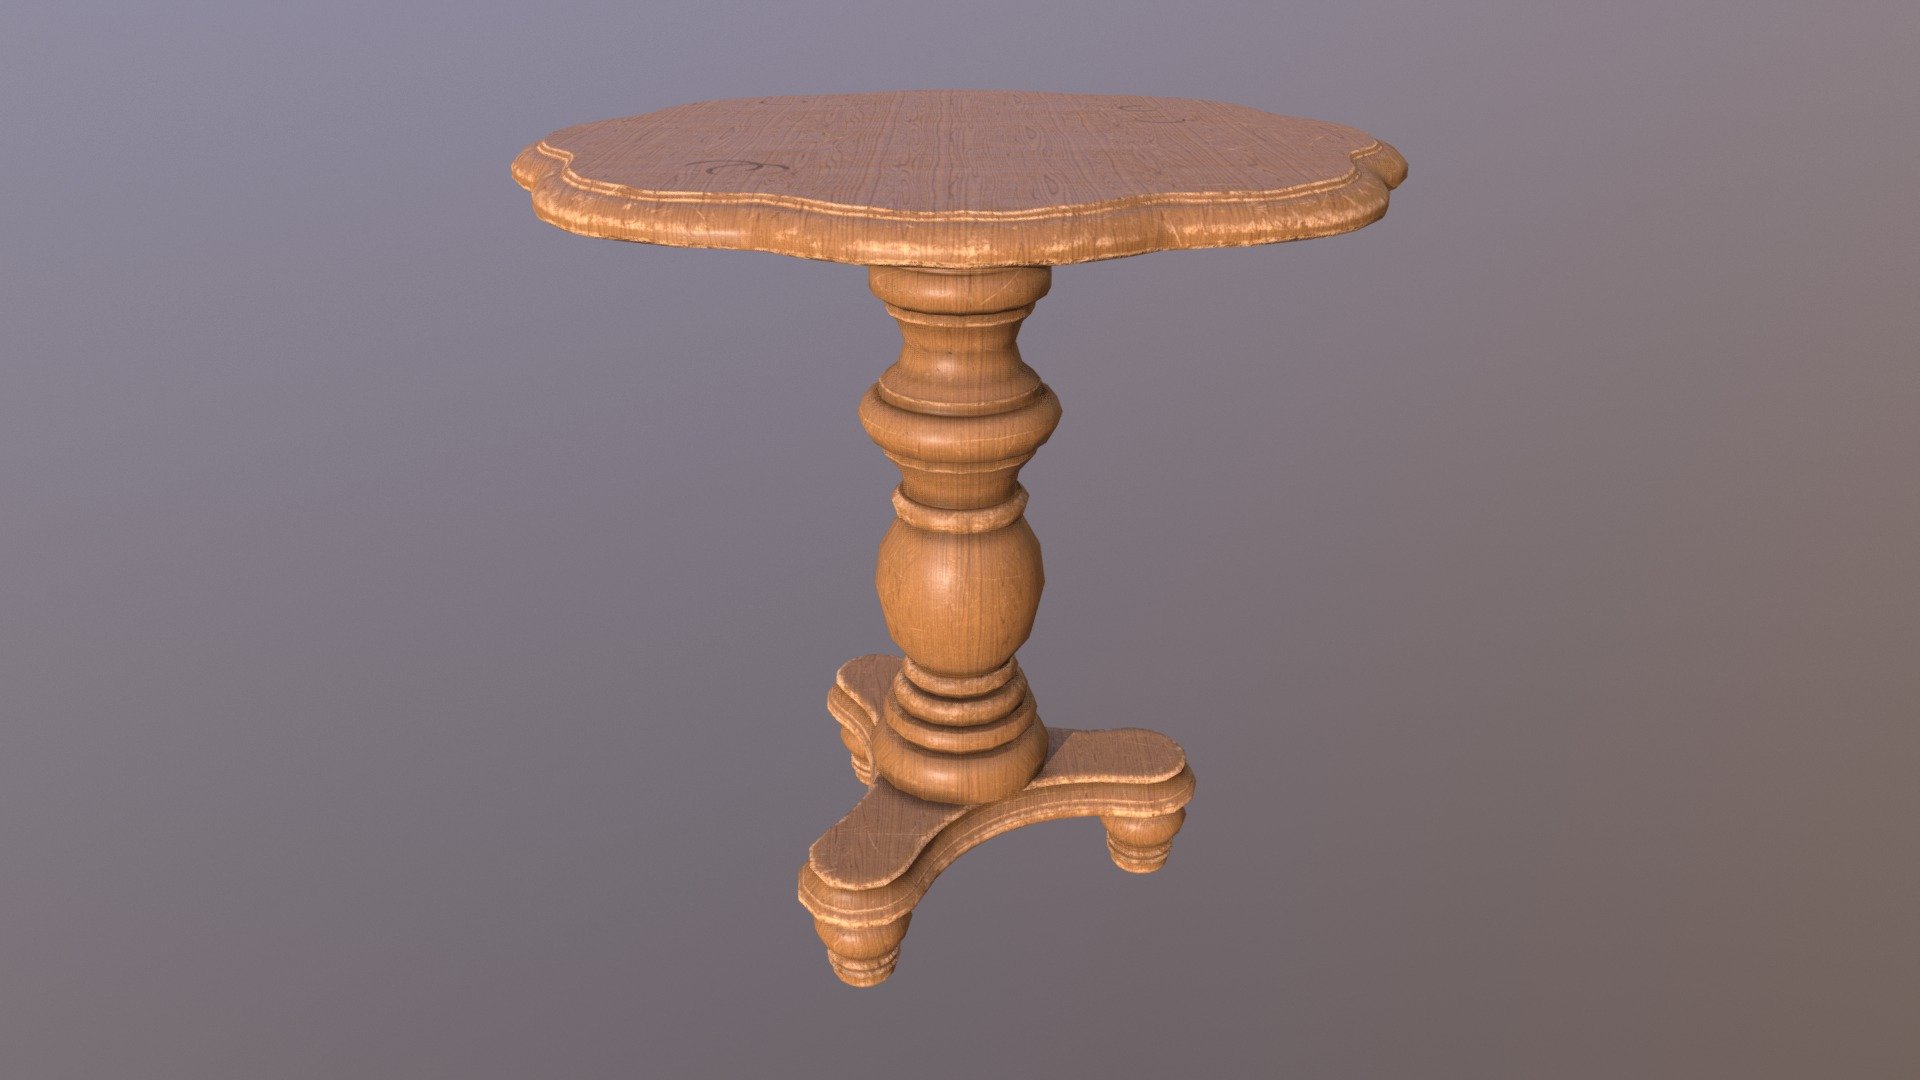 Antique Round Wooden Table #001